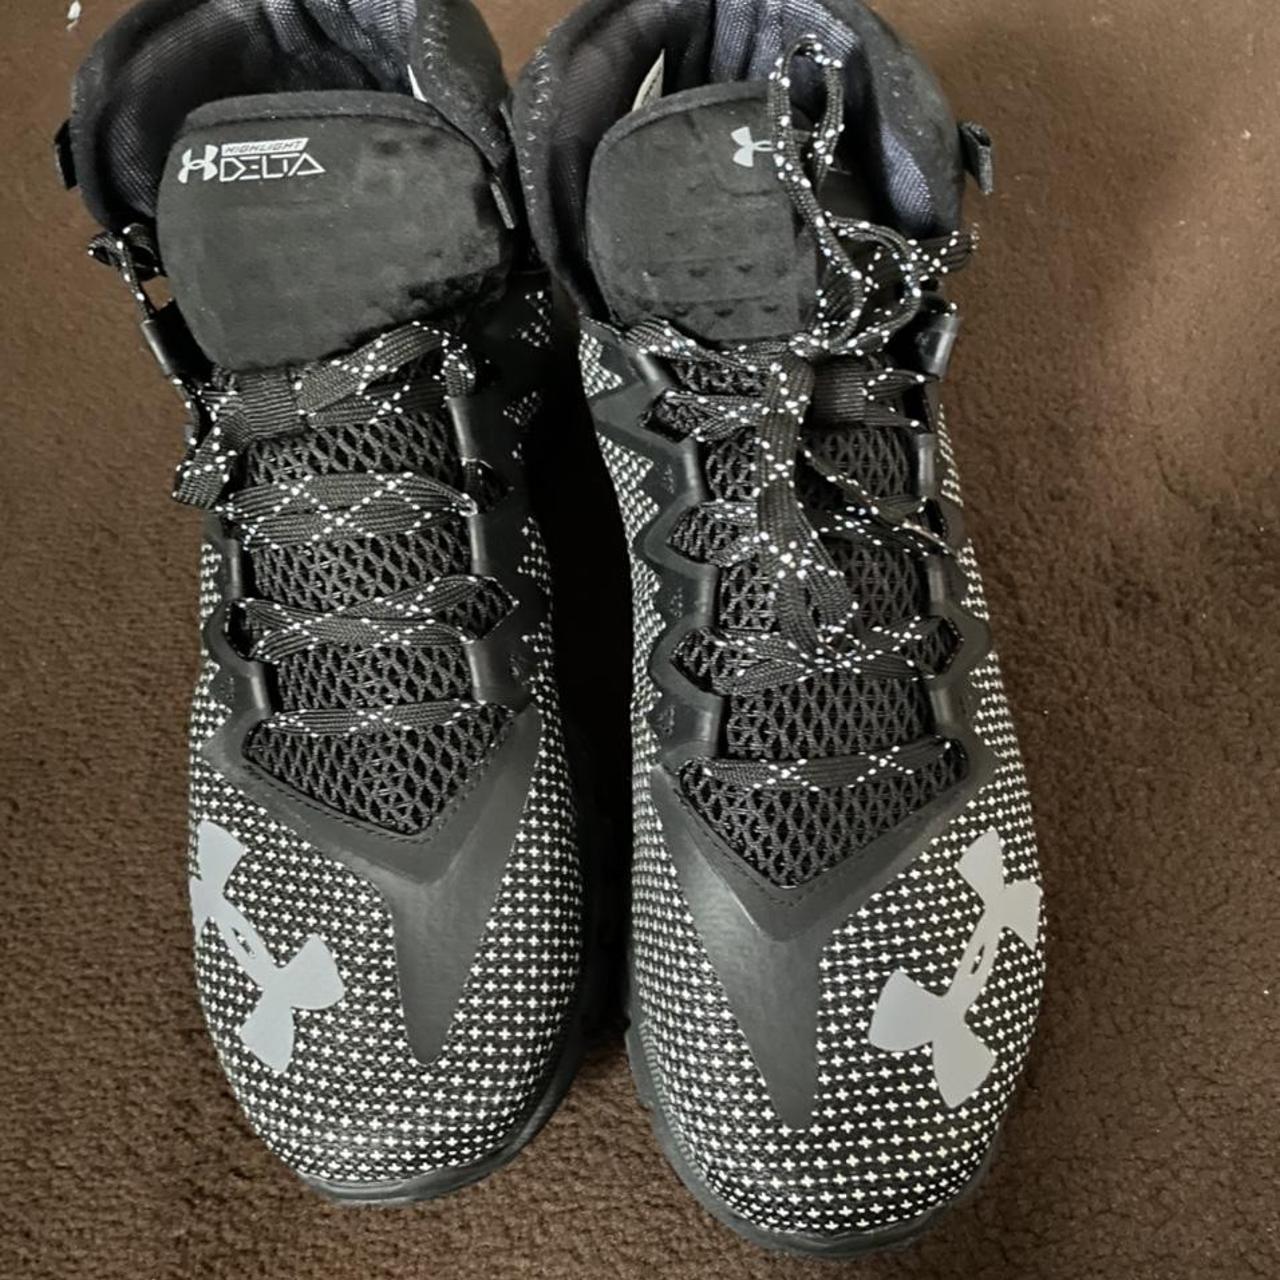 Under armour shoes. Never been worn size 10uk - Depop